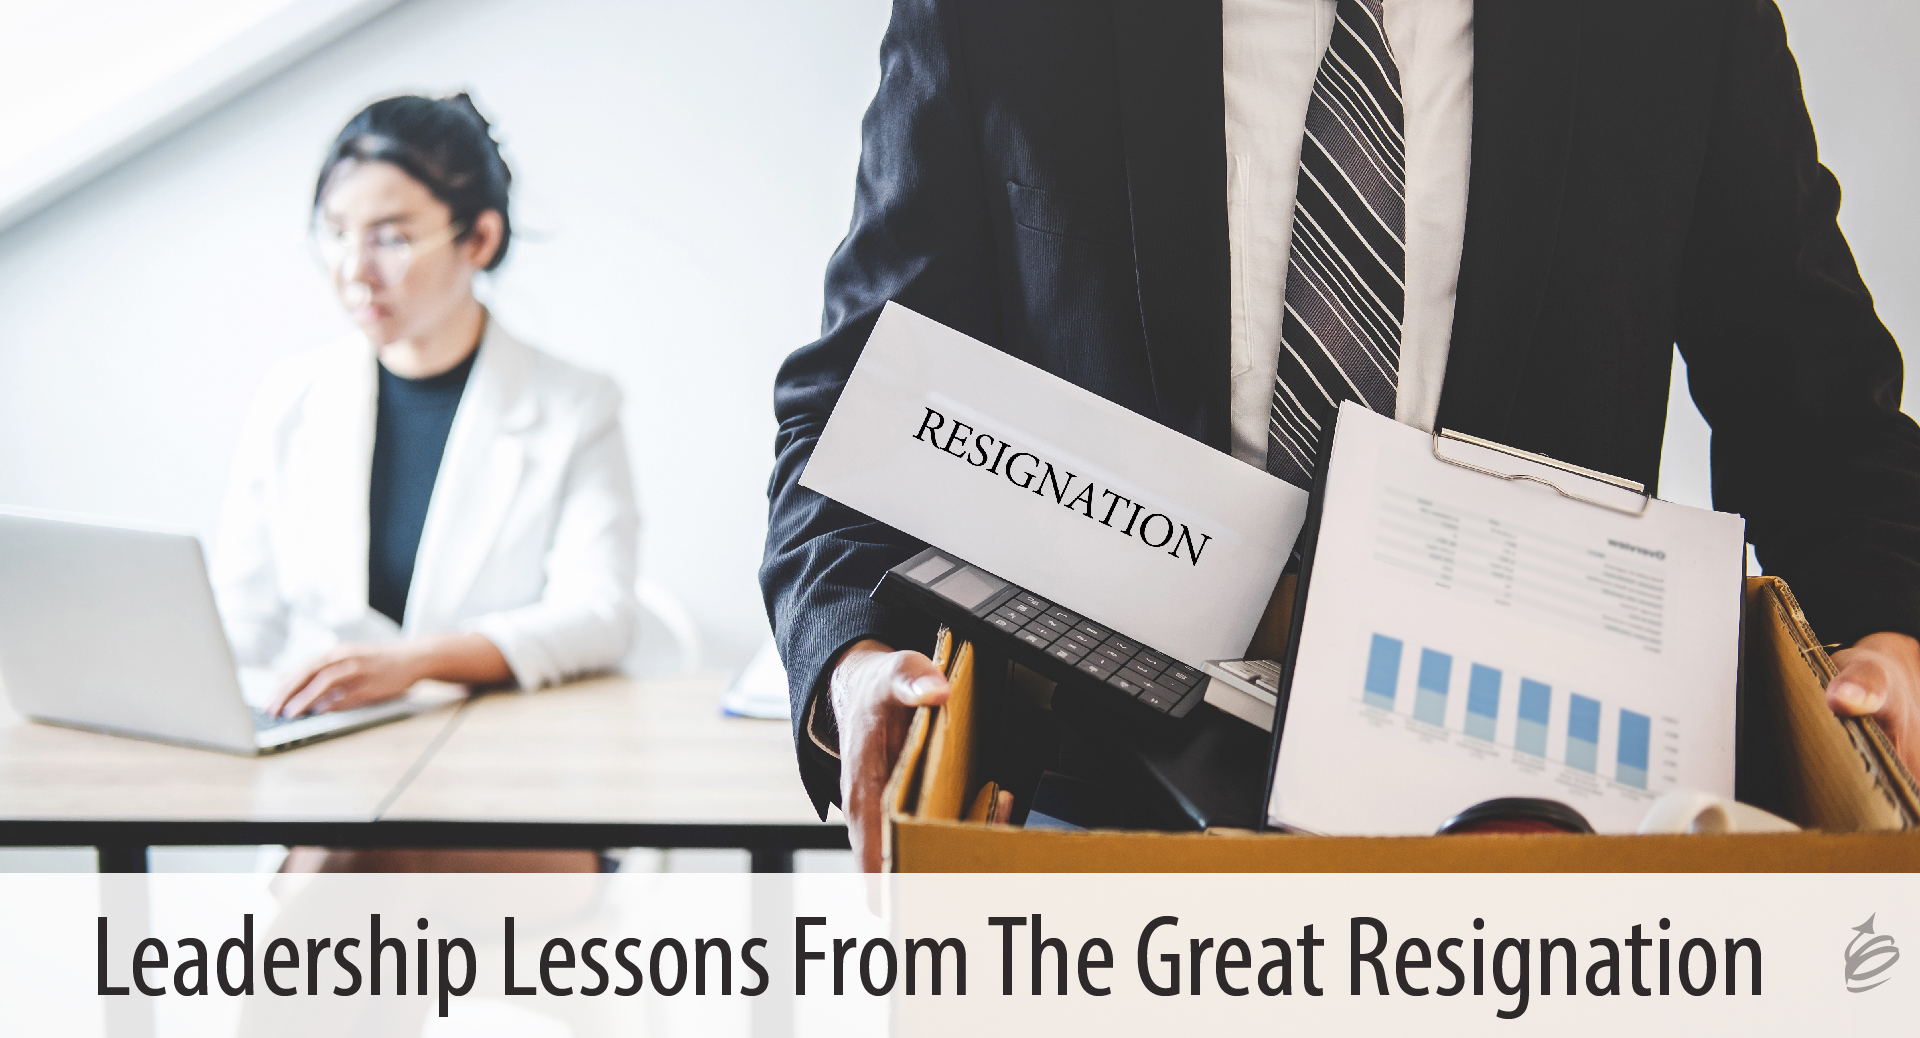 Lessons from The Great Resignation